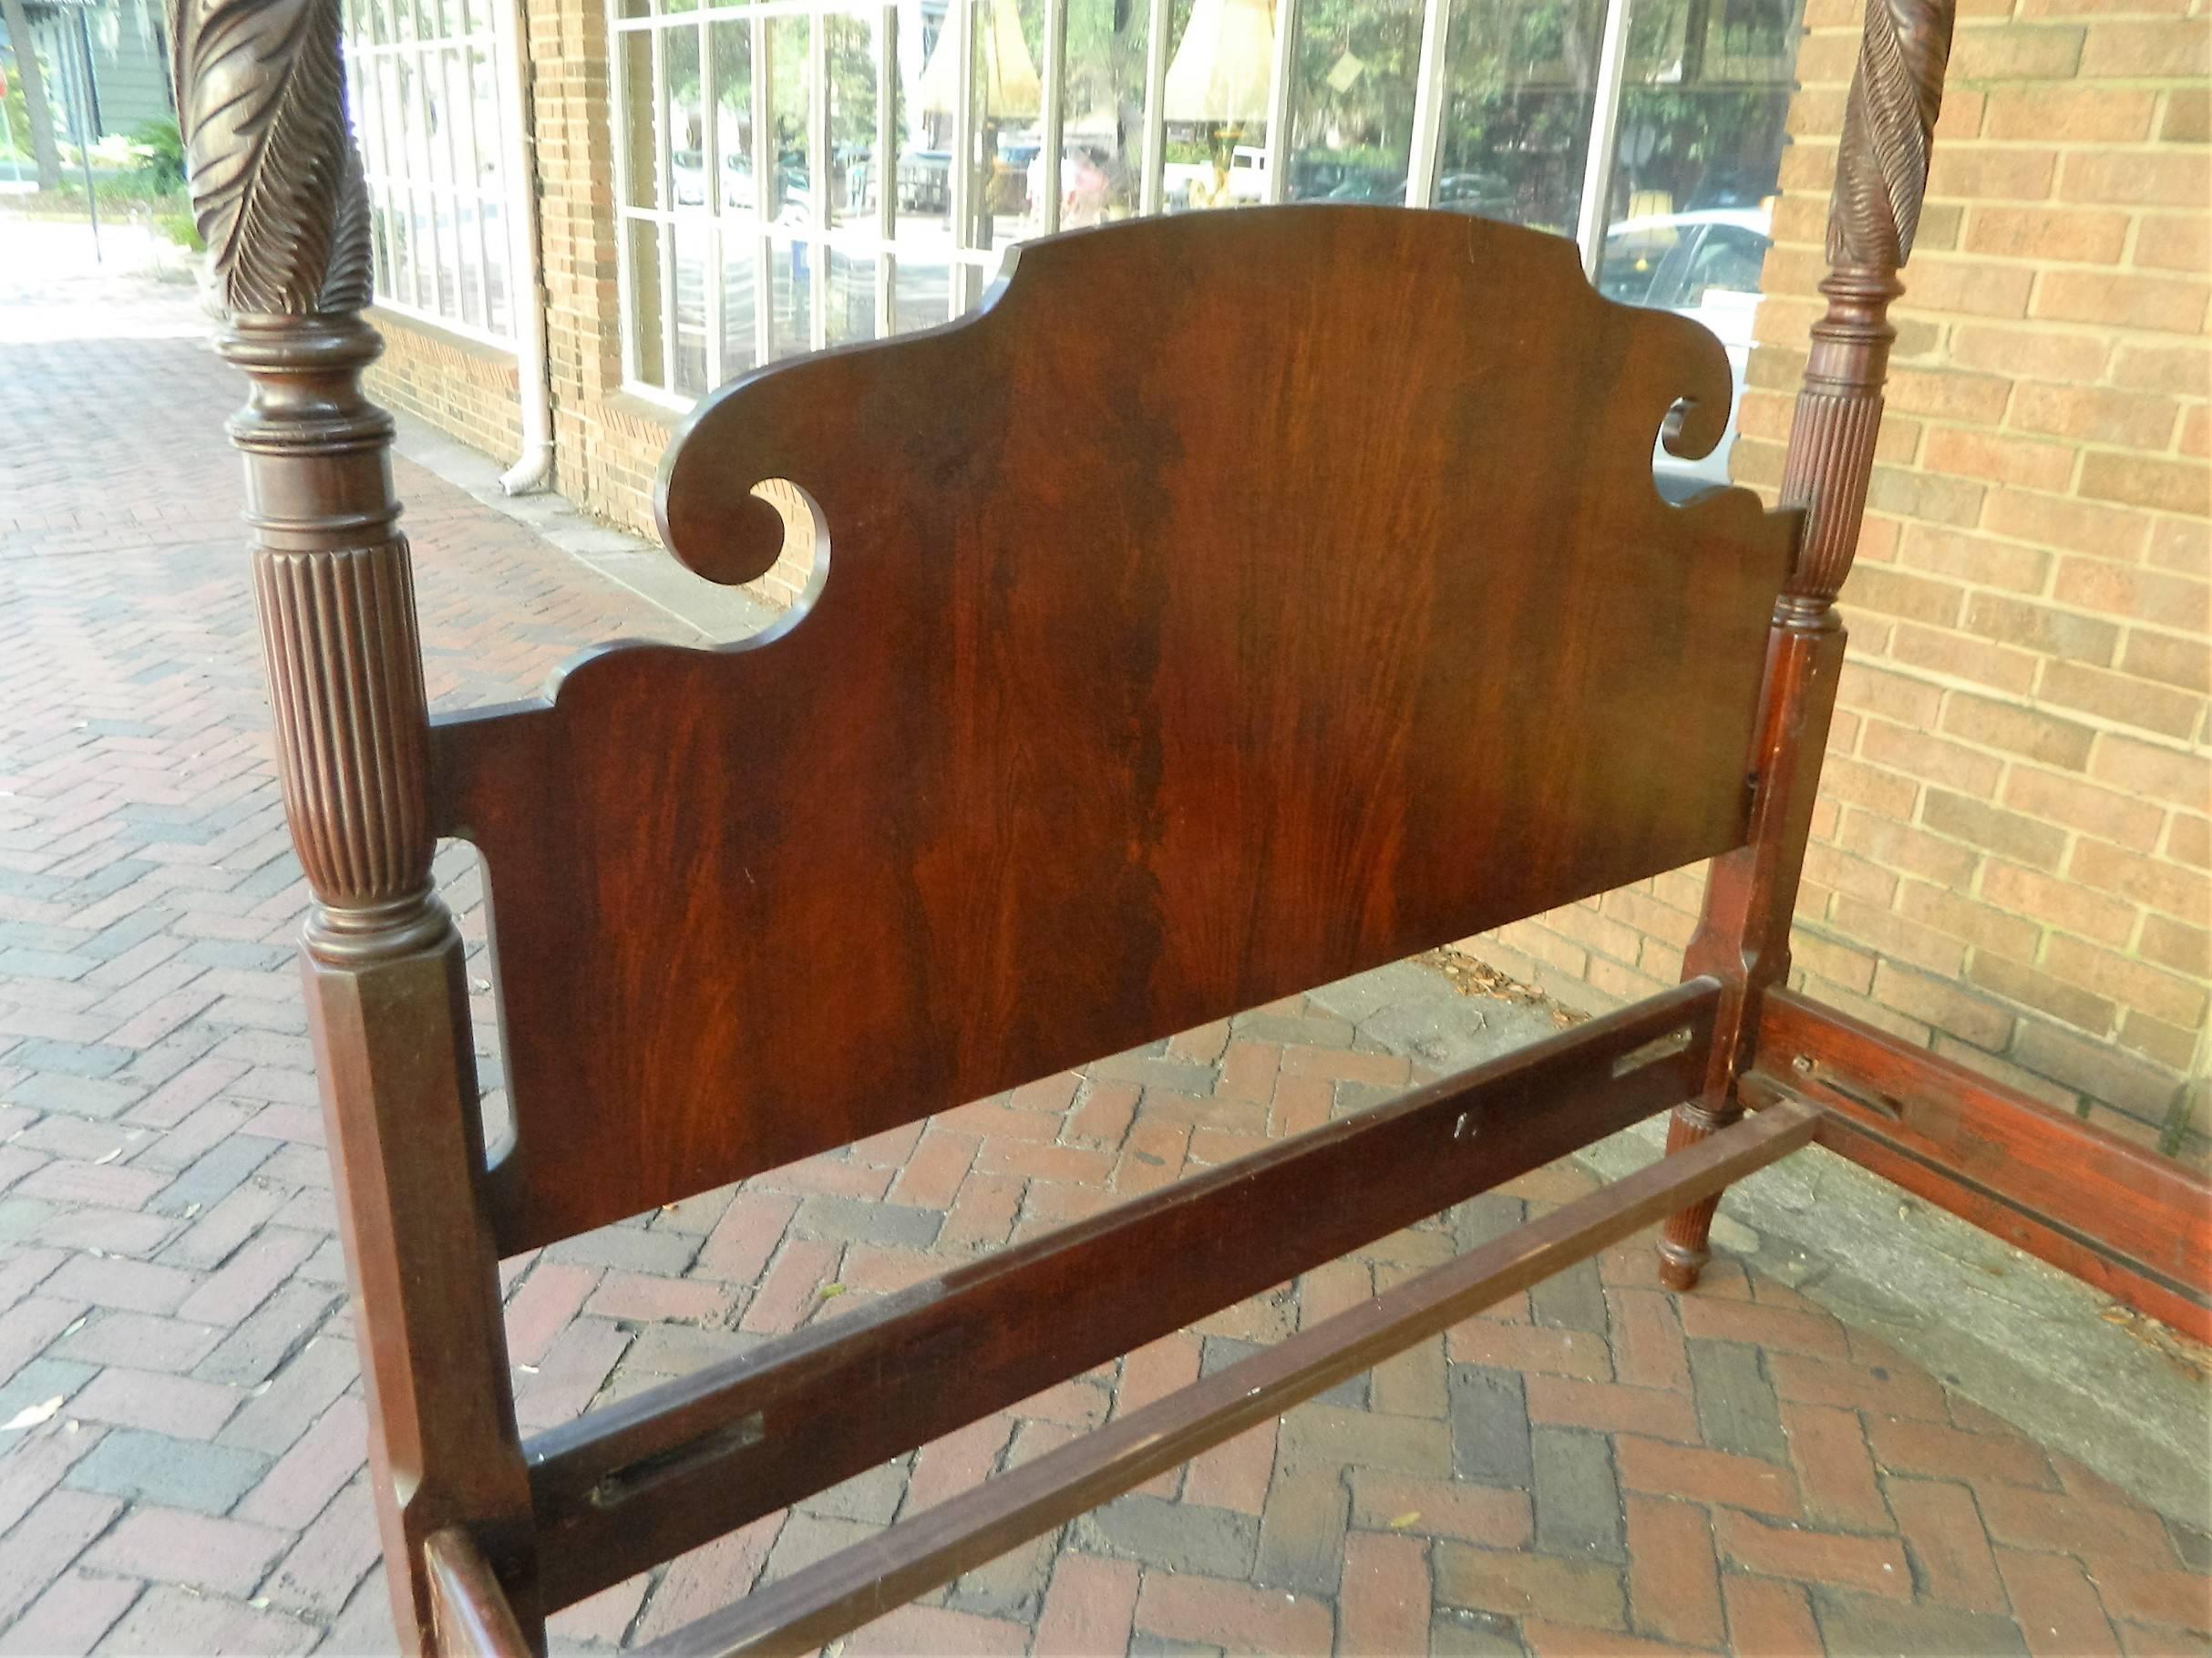 American four-poster queen bed with tobacco leaf carvings, 19th century. Mahogany wood. Bed frame has been professionally extended to accommodate a standard queen box spring and mattress.
                        